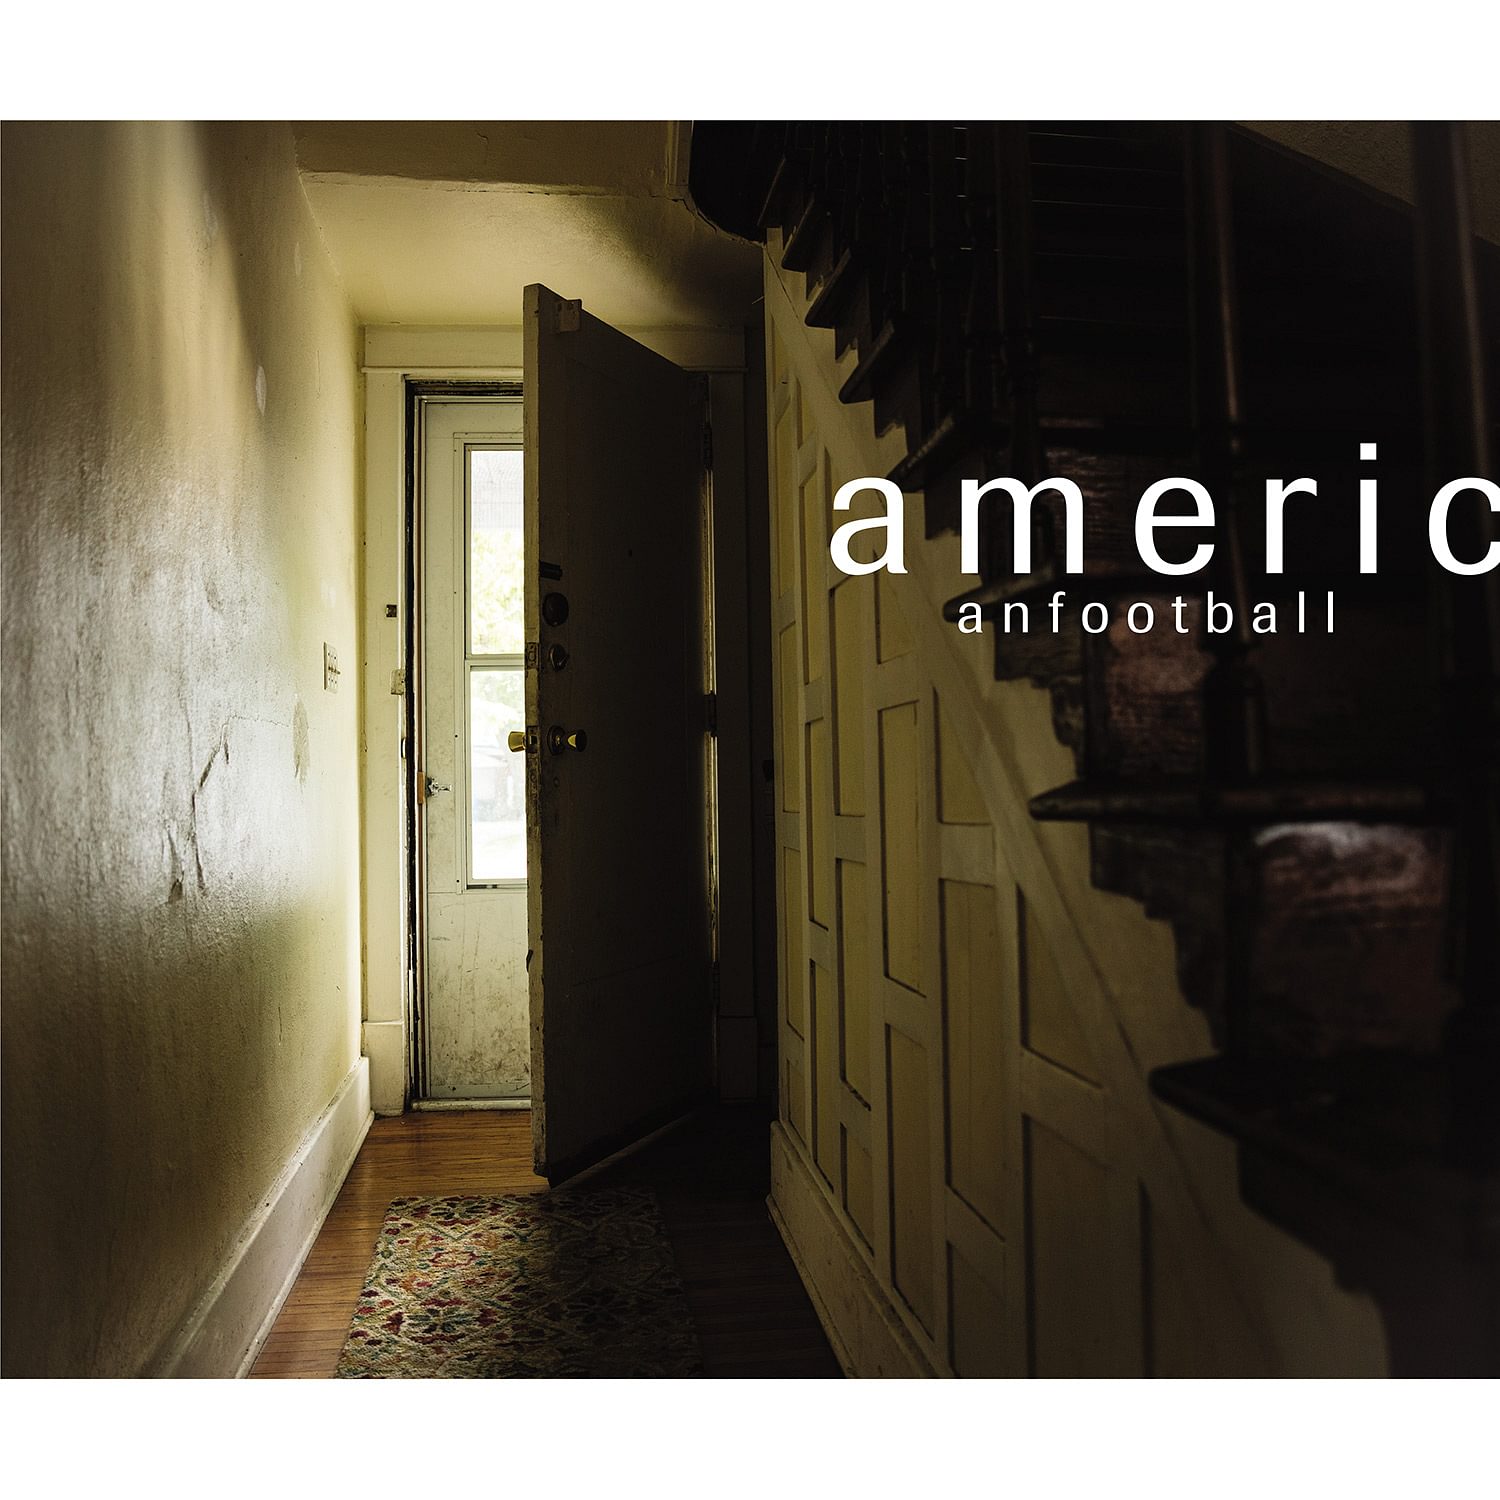 American Football announce second album - seventeen years (!) after their first